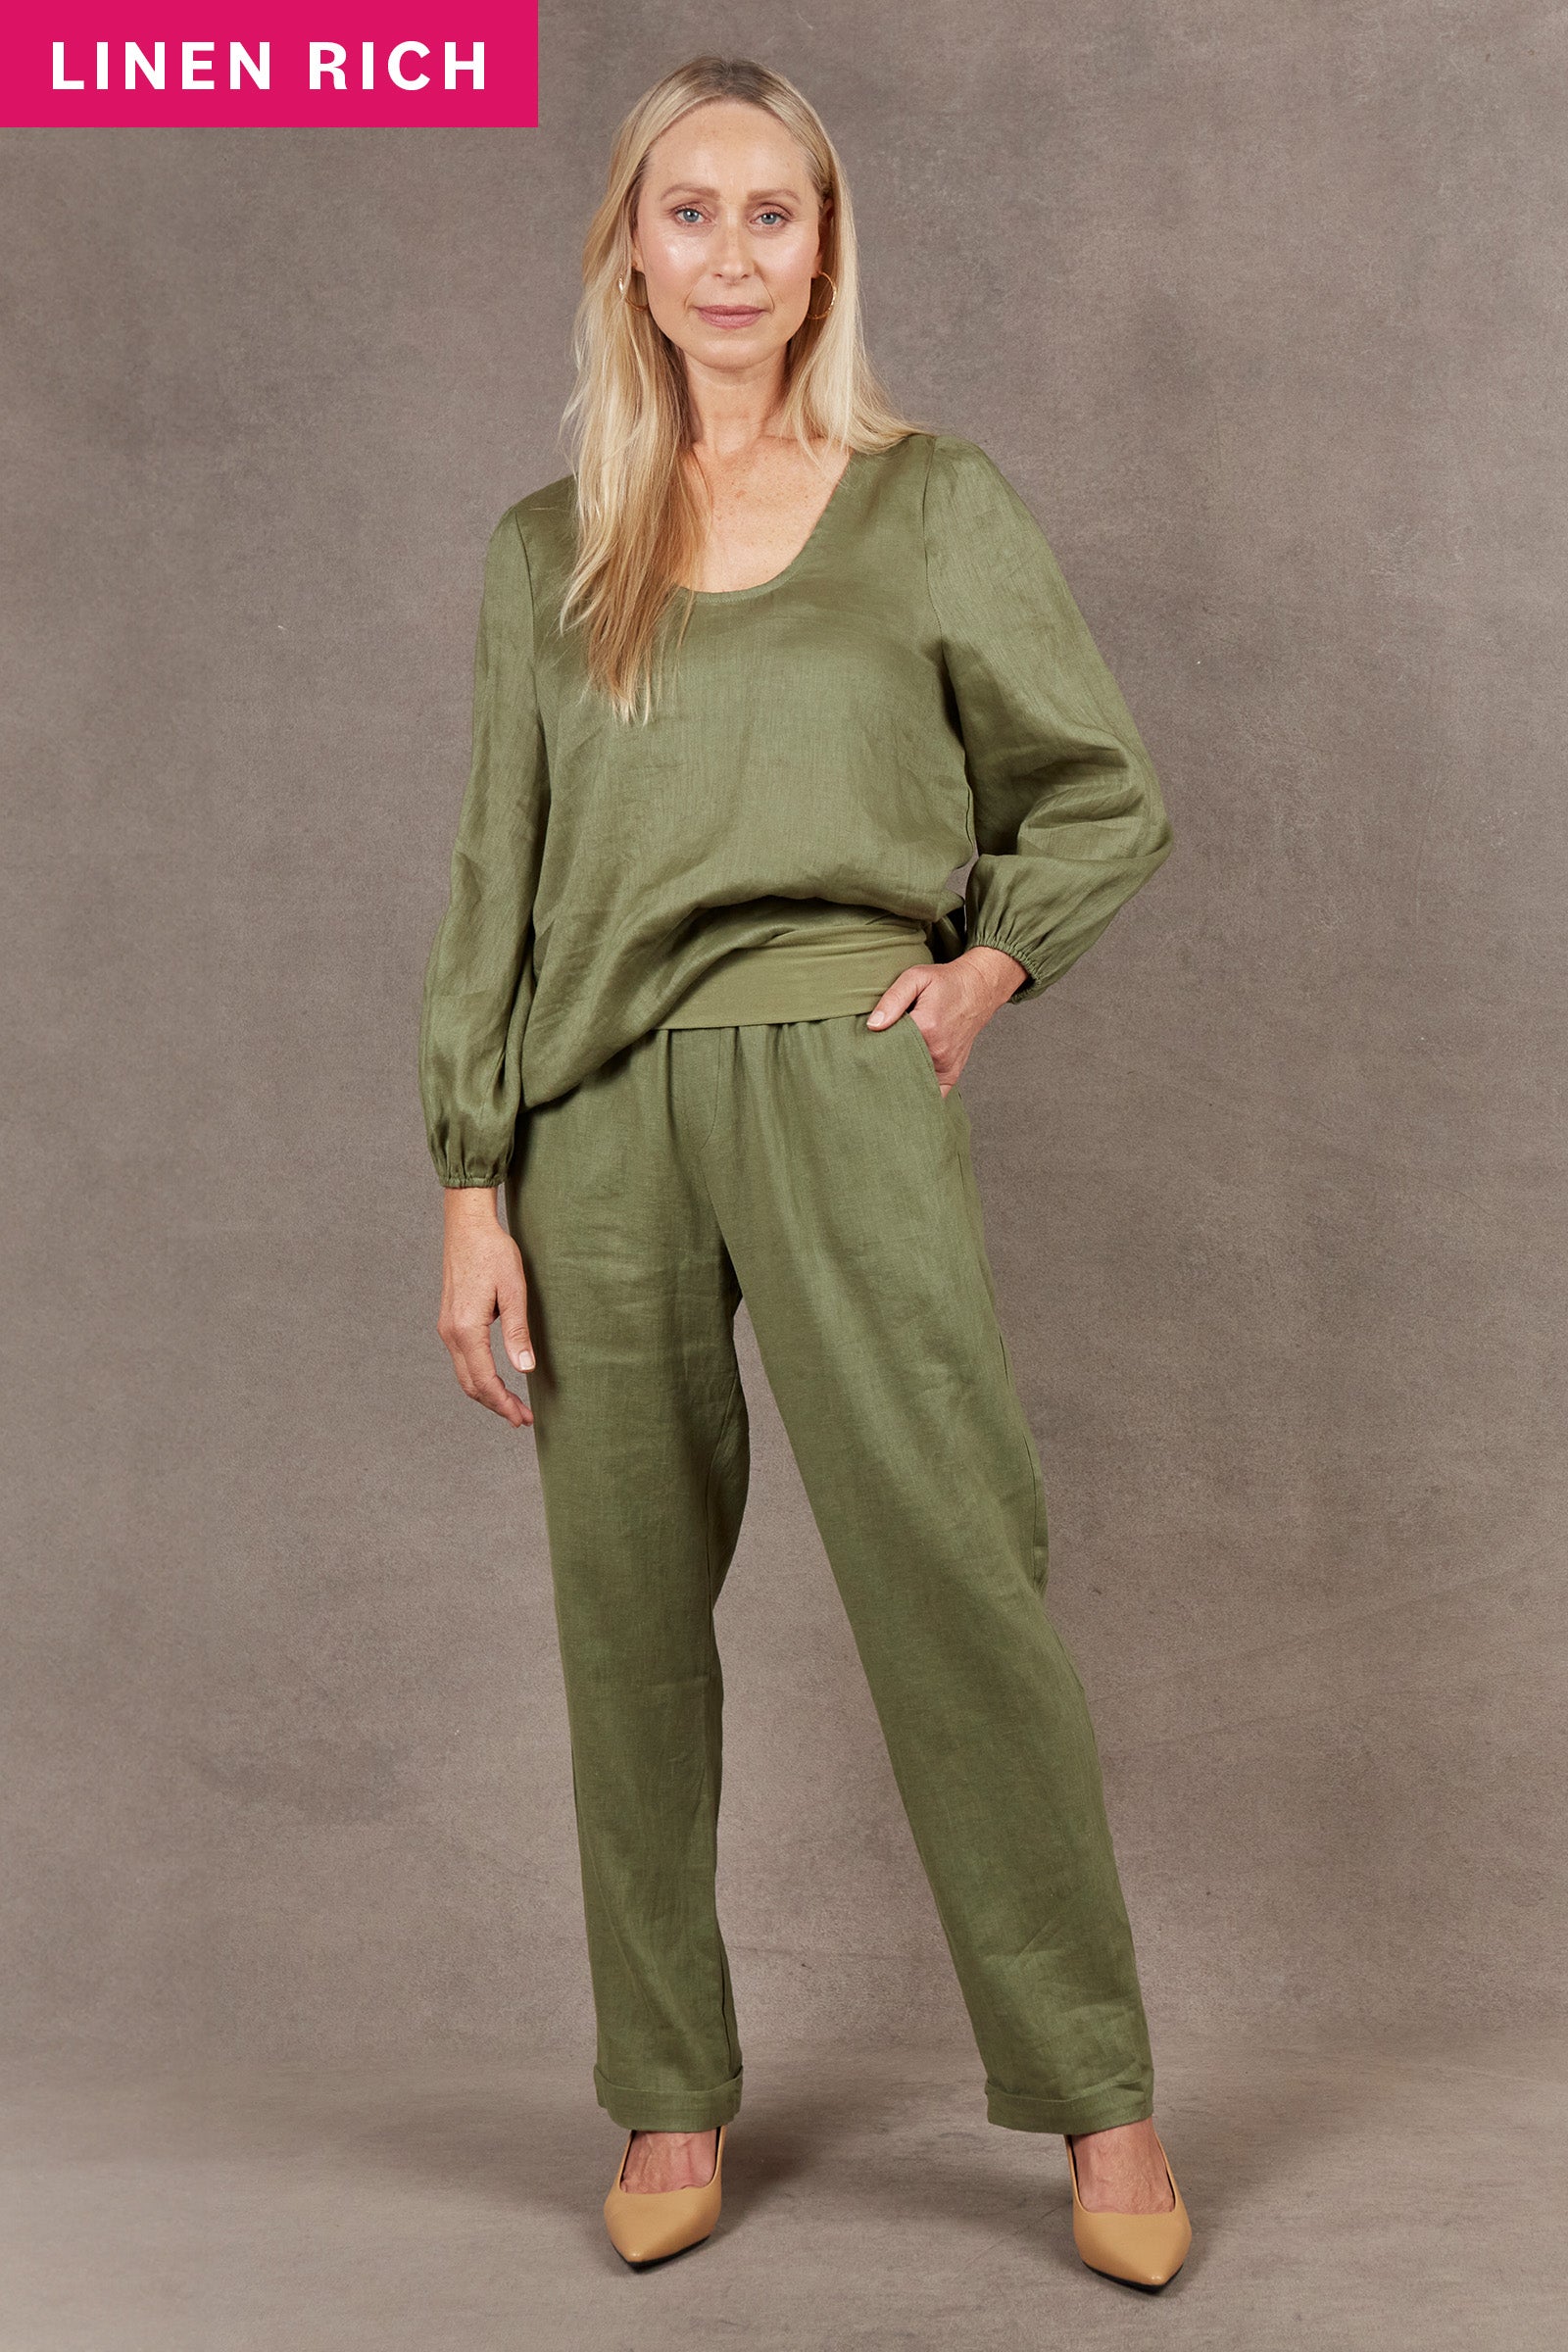 Nama Relax Pant - Fern - eb&ive Clothing - Pant Relaxed Linen